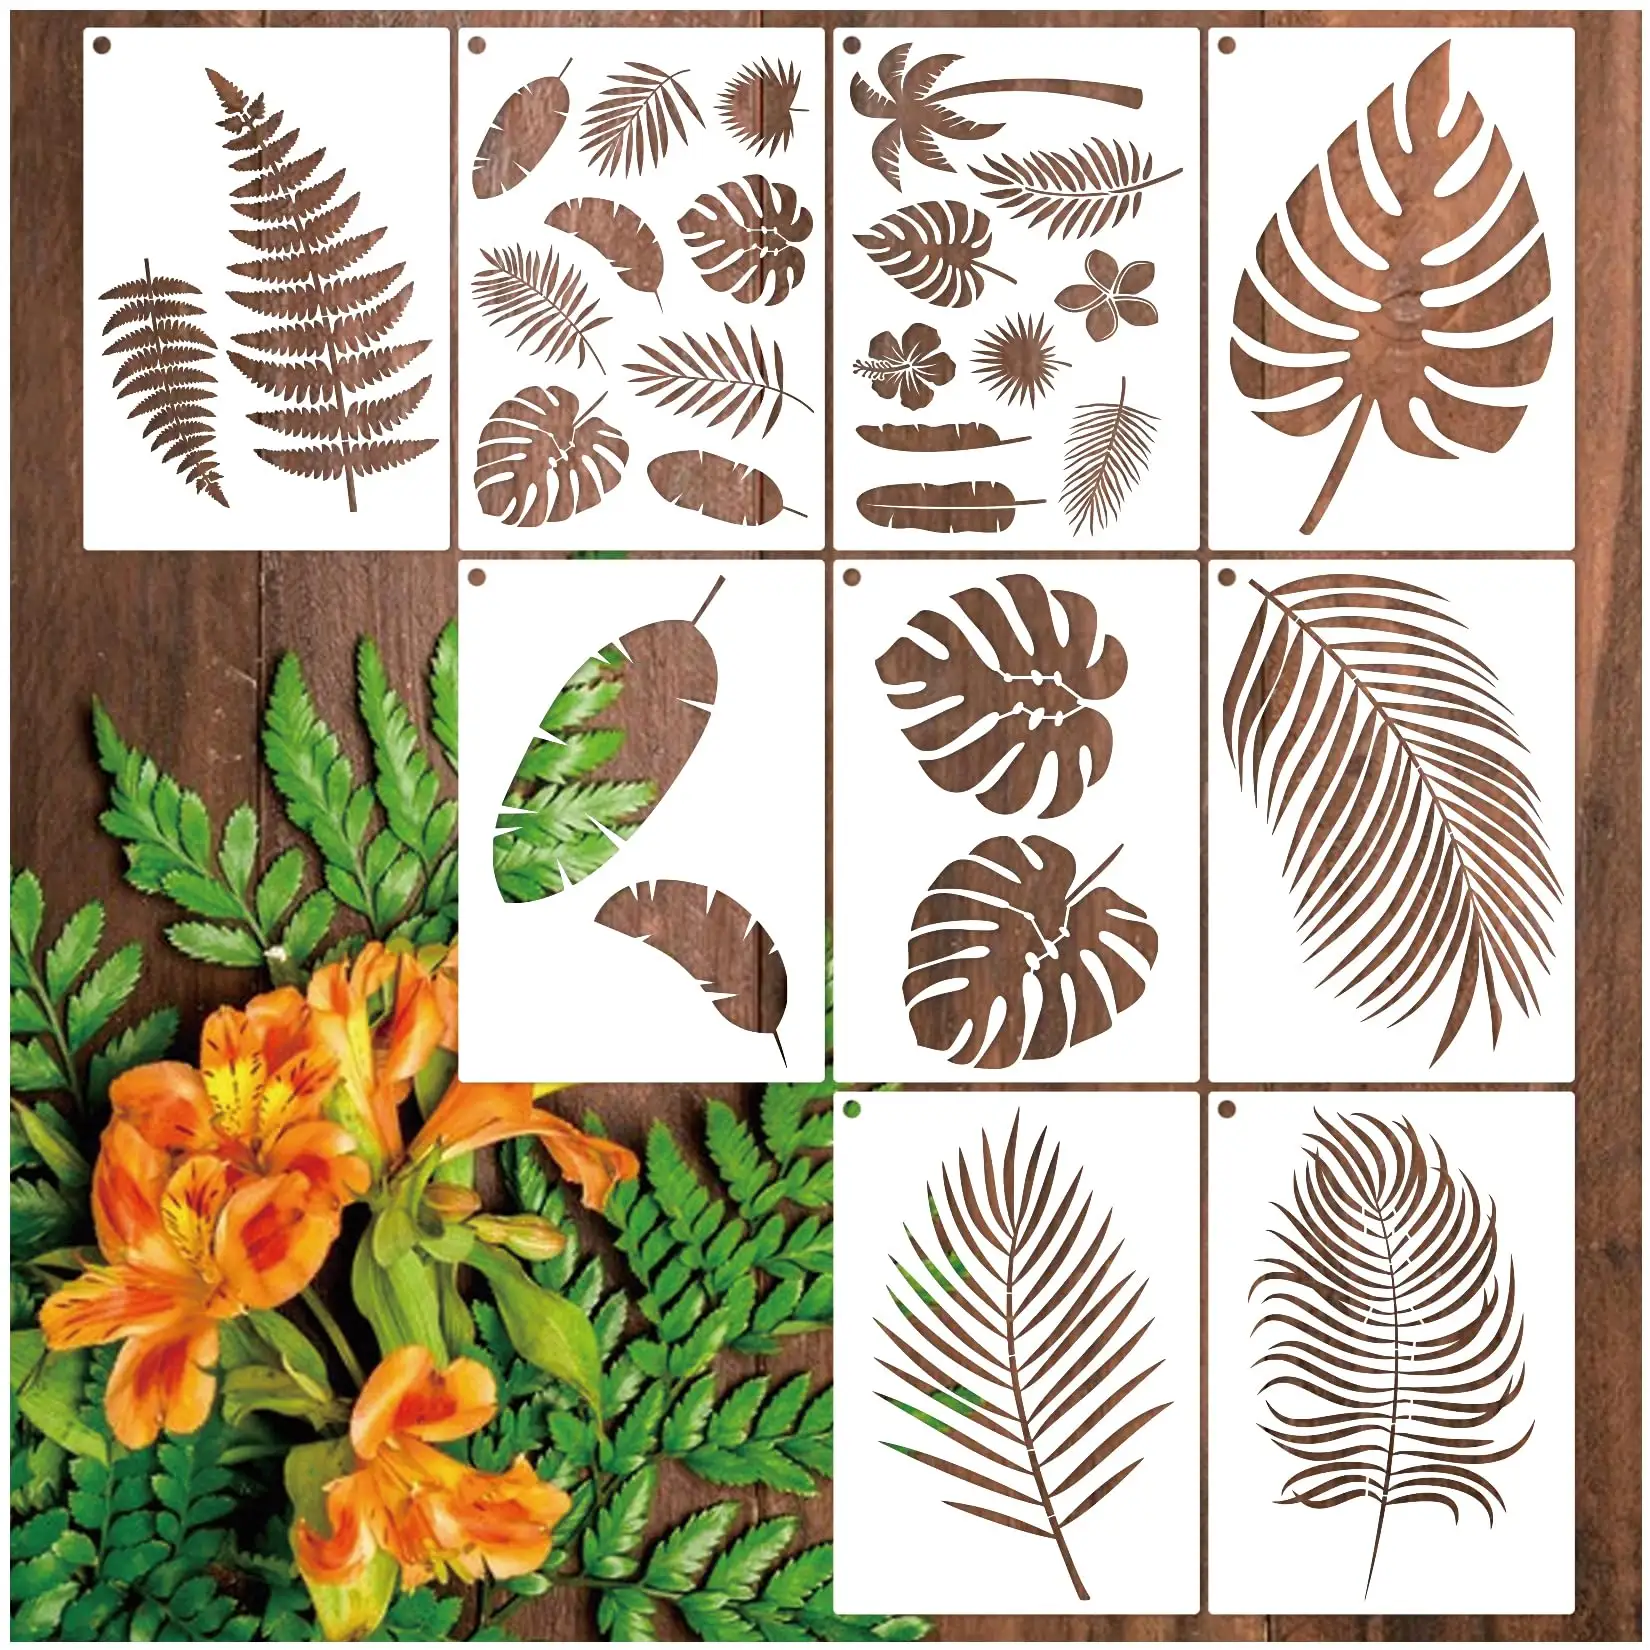 Large Tropical Leaves Stencils A4 Palm Leaf Stencil Hawaiian Fern LeavesTemplate Paint Stencils for Painting on Wood